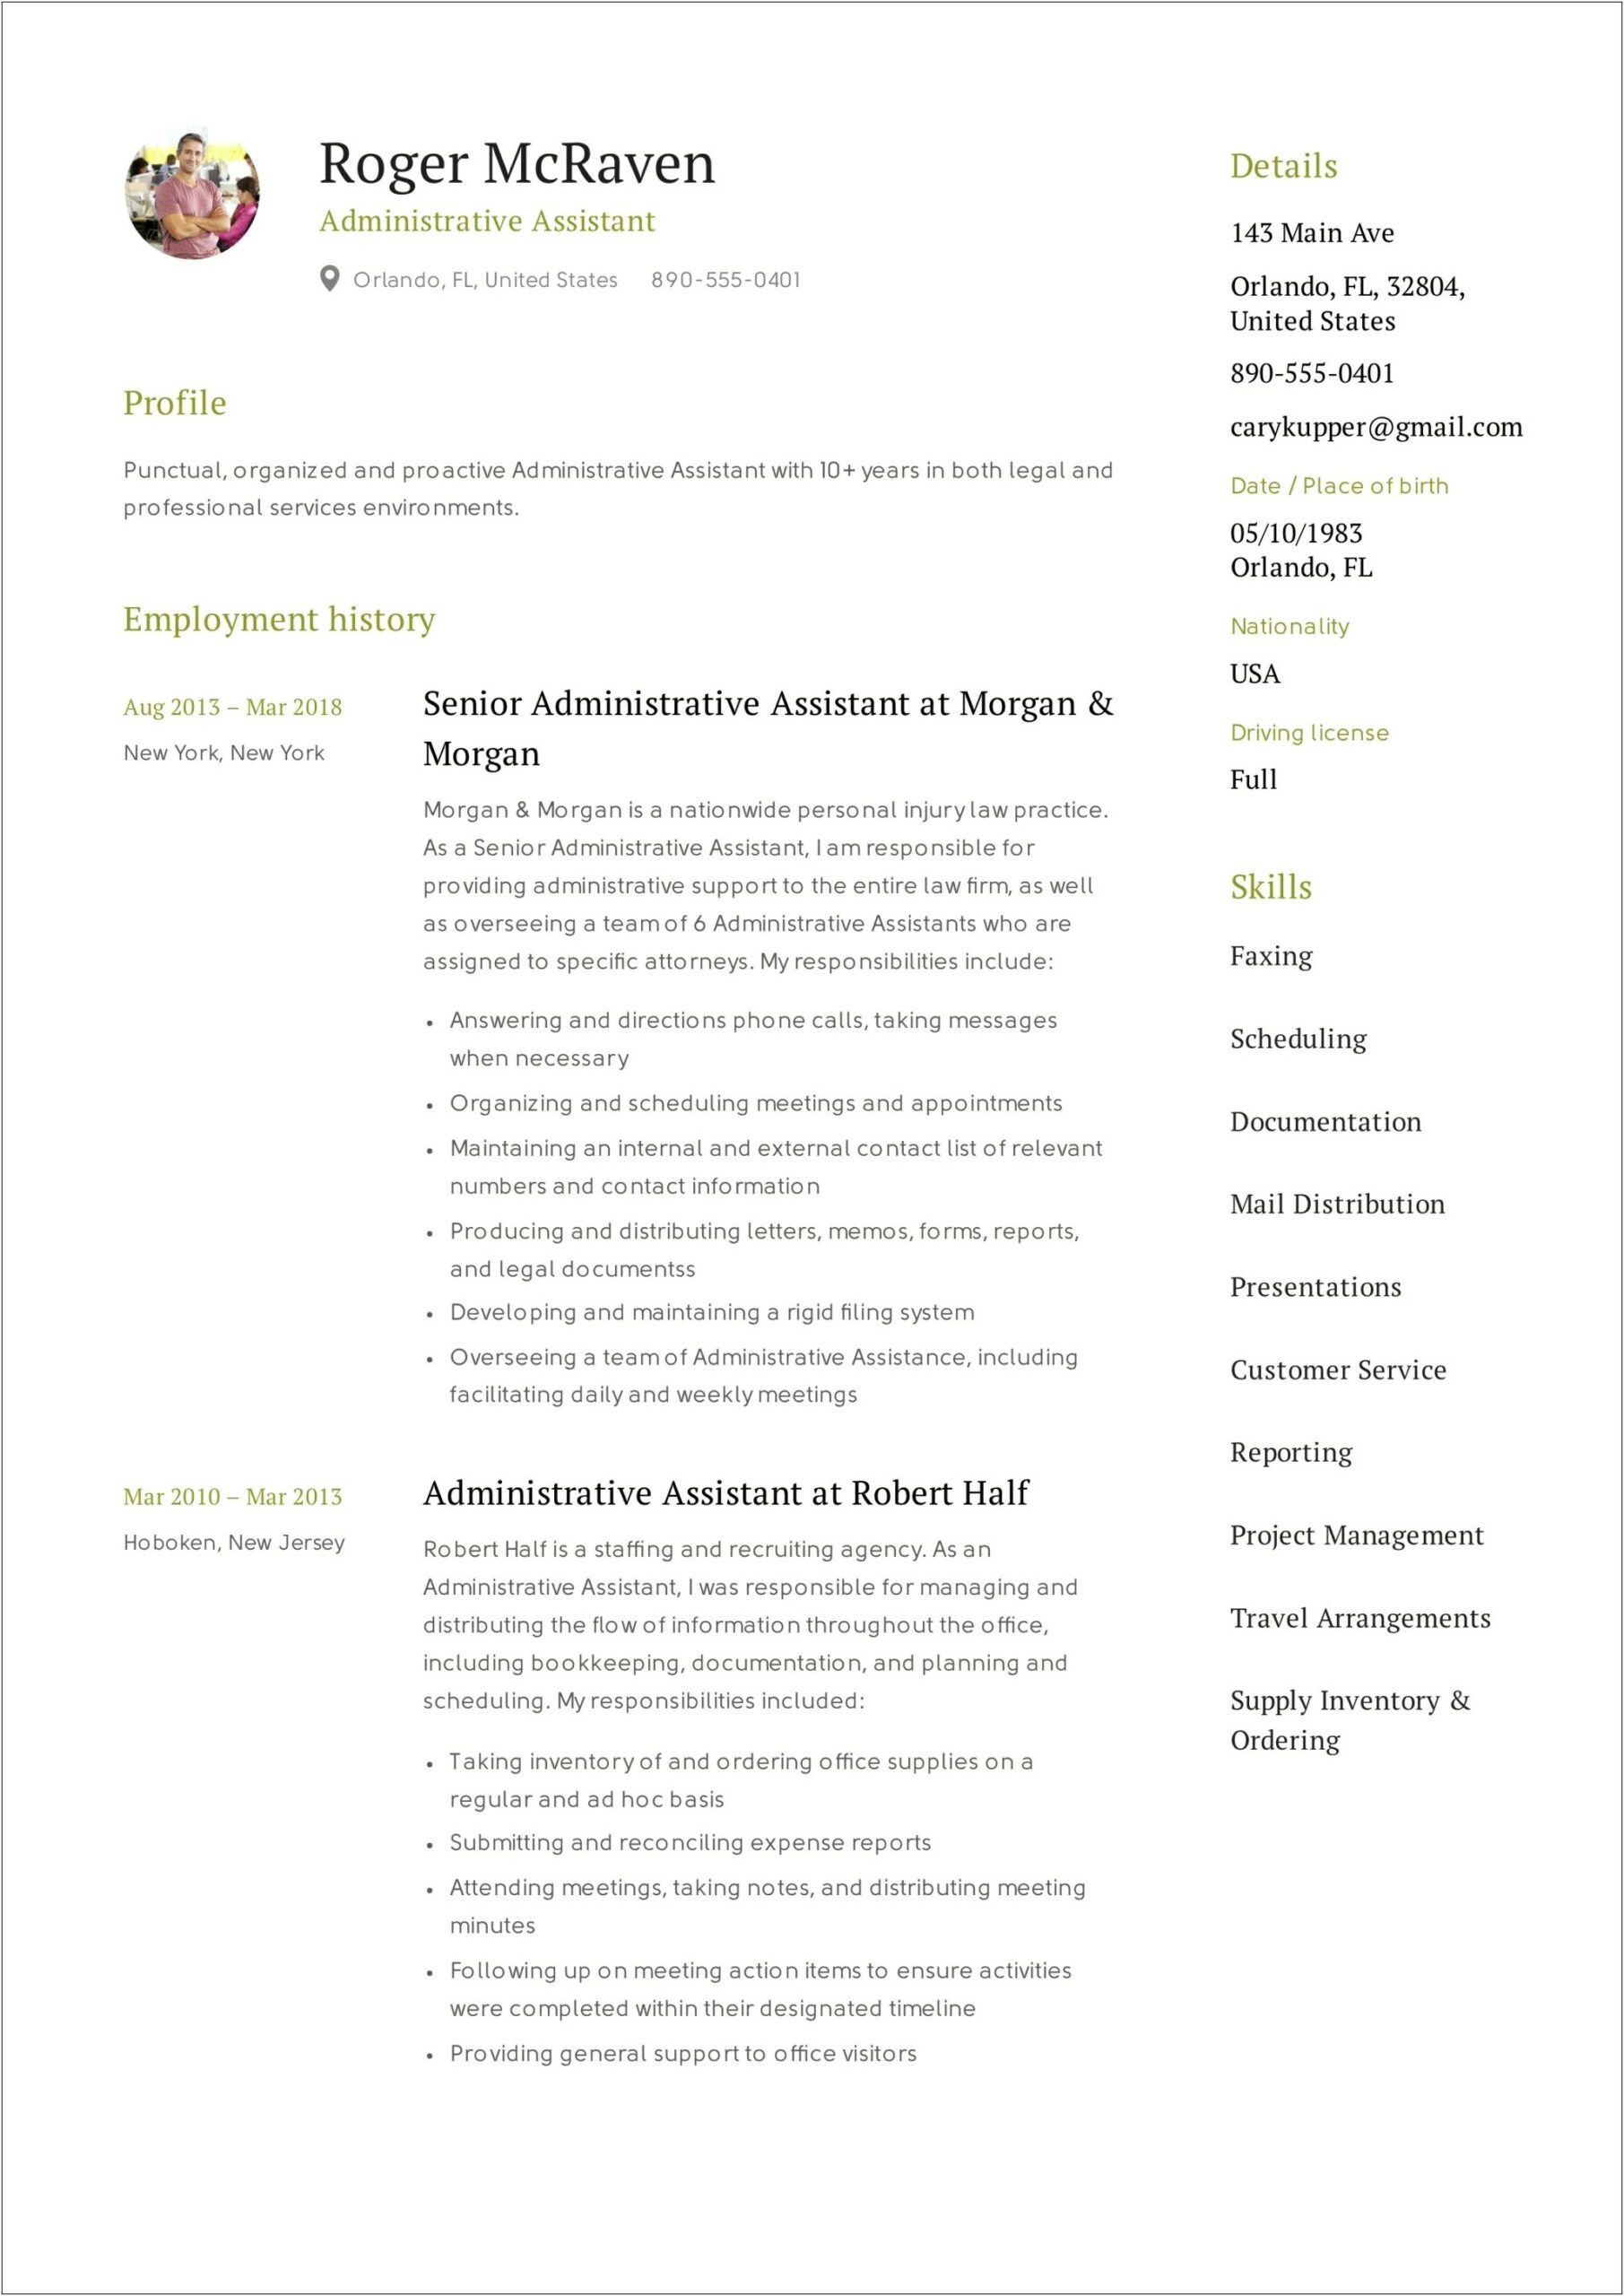 Examples Of Sr. Administrative Assistant Resumes